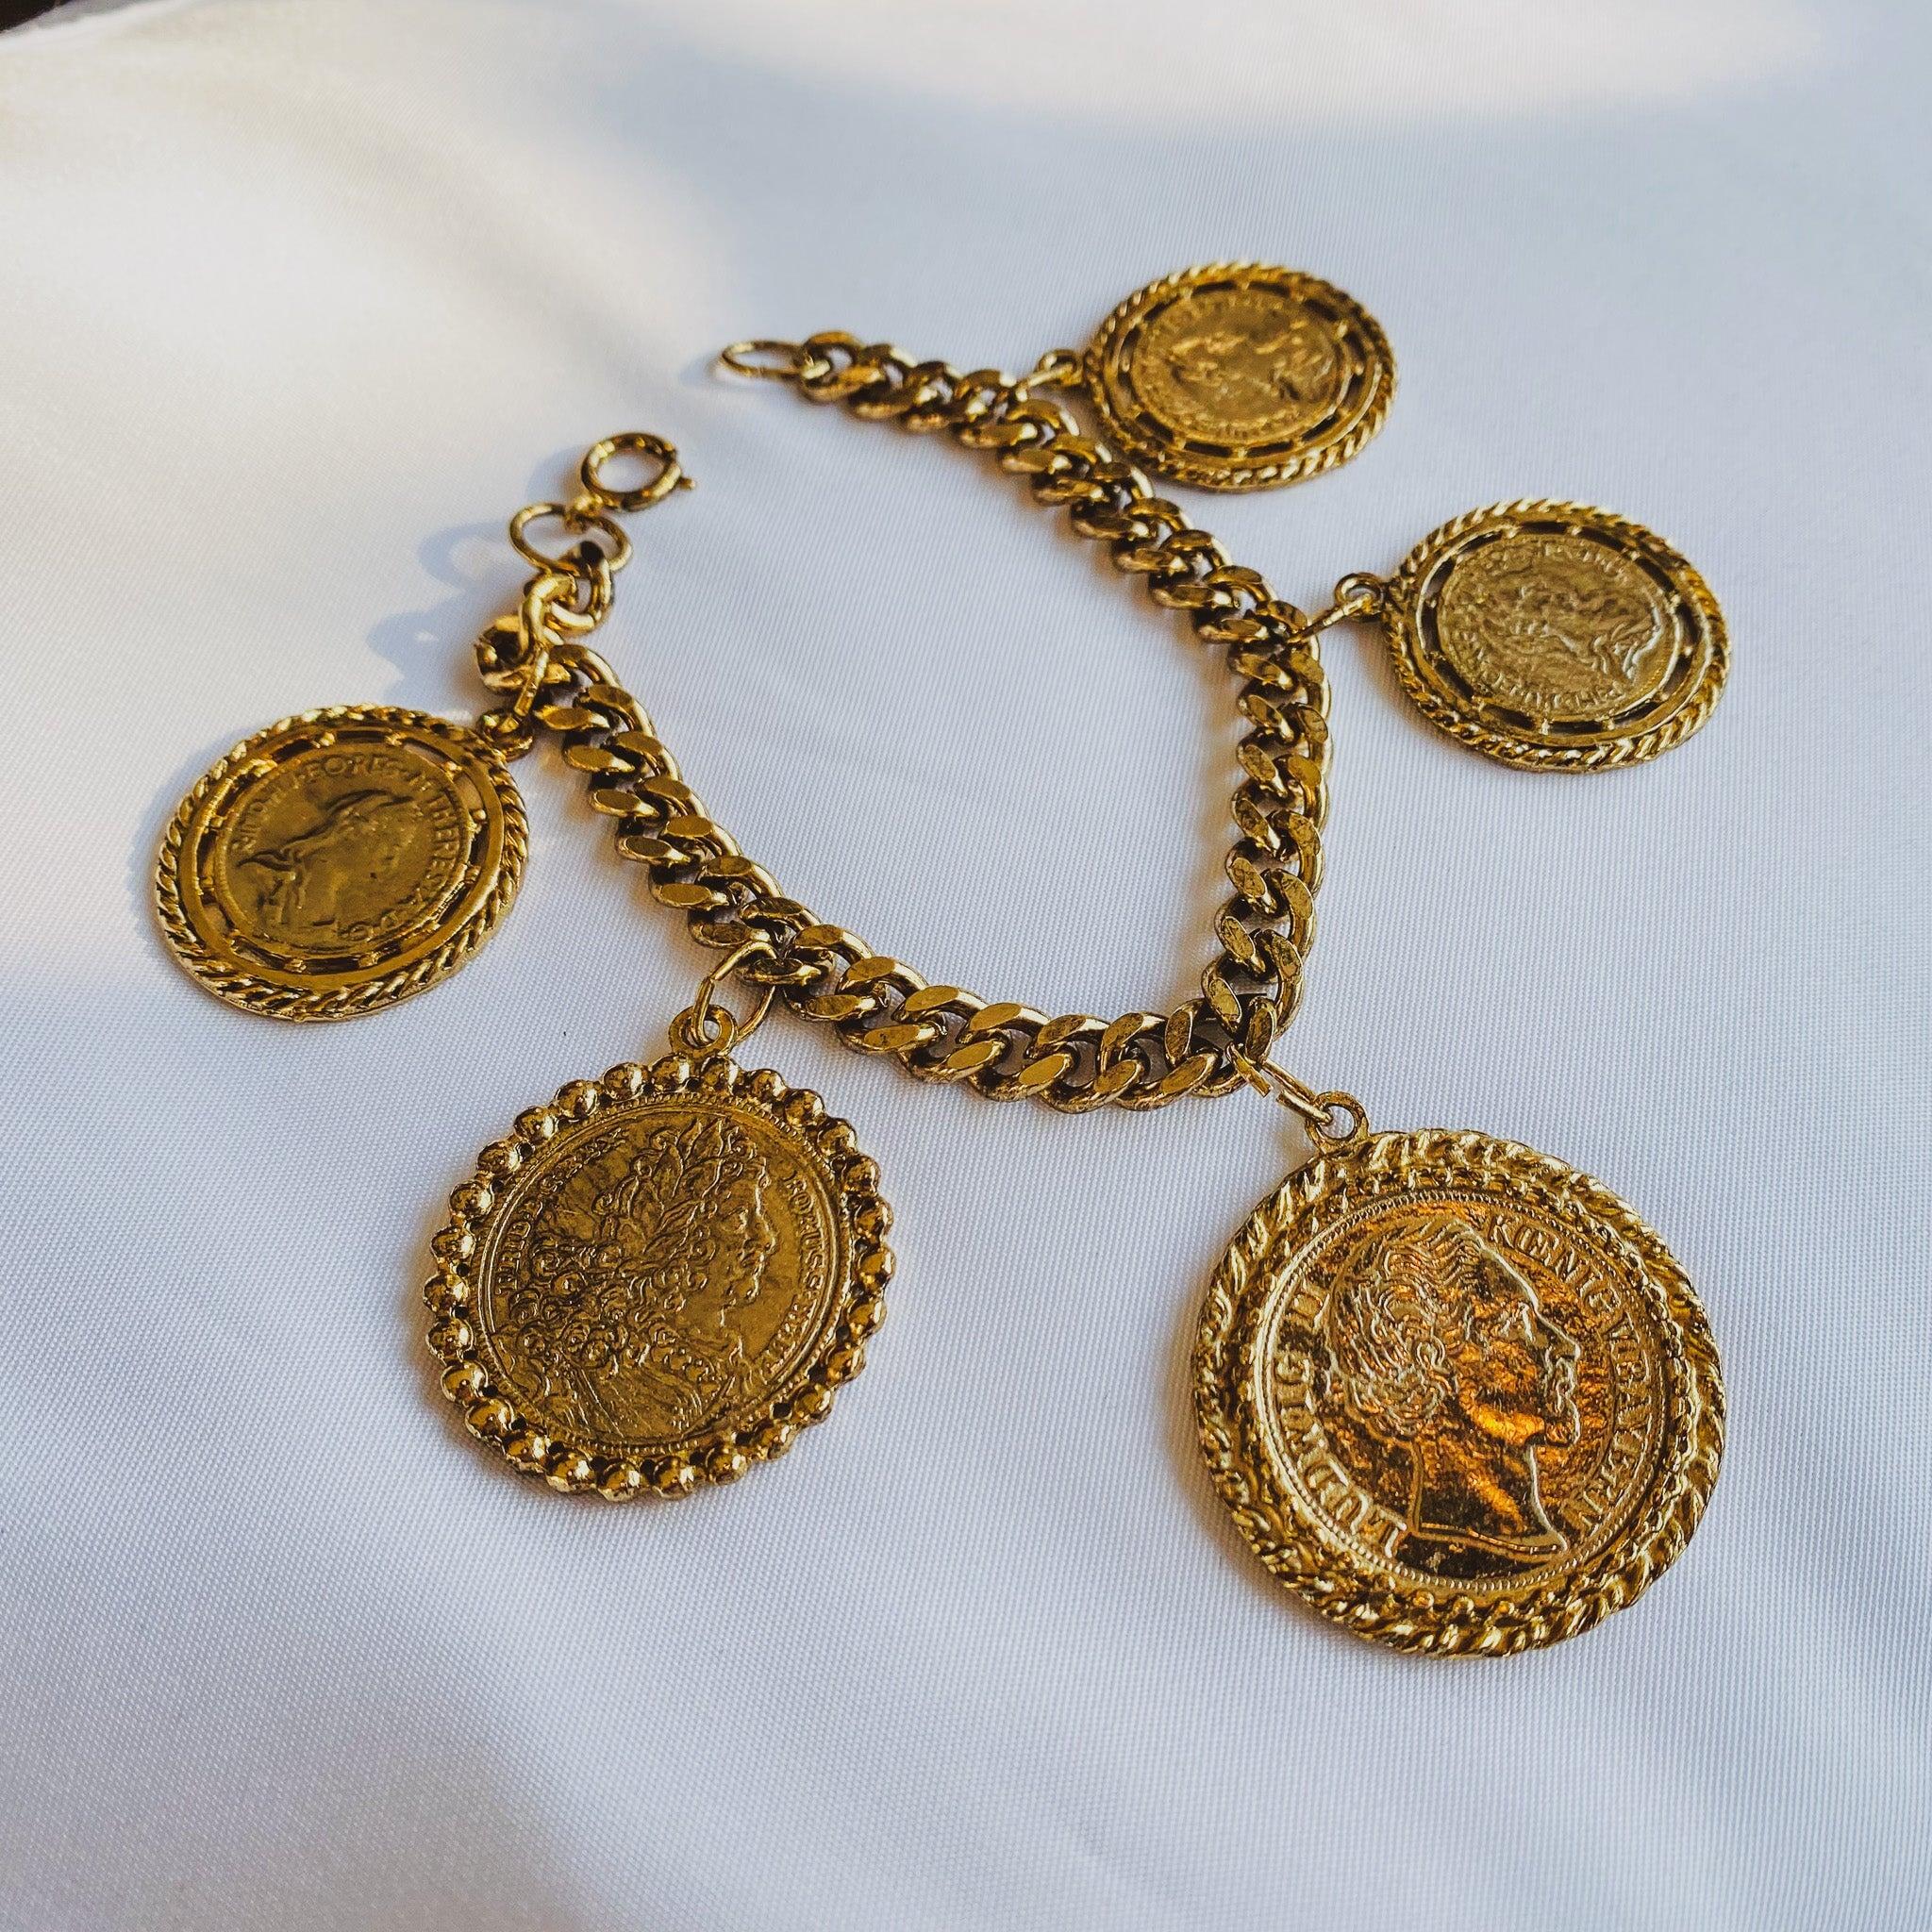 
Vintage 1980s Medallion Charm Bracelet
 

A super cool statement vintage charm bracelet. Made in the 1980s in the UK from high quality gold coloured metal. Features a chunky gold plated 7